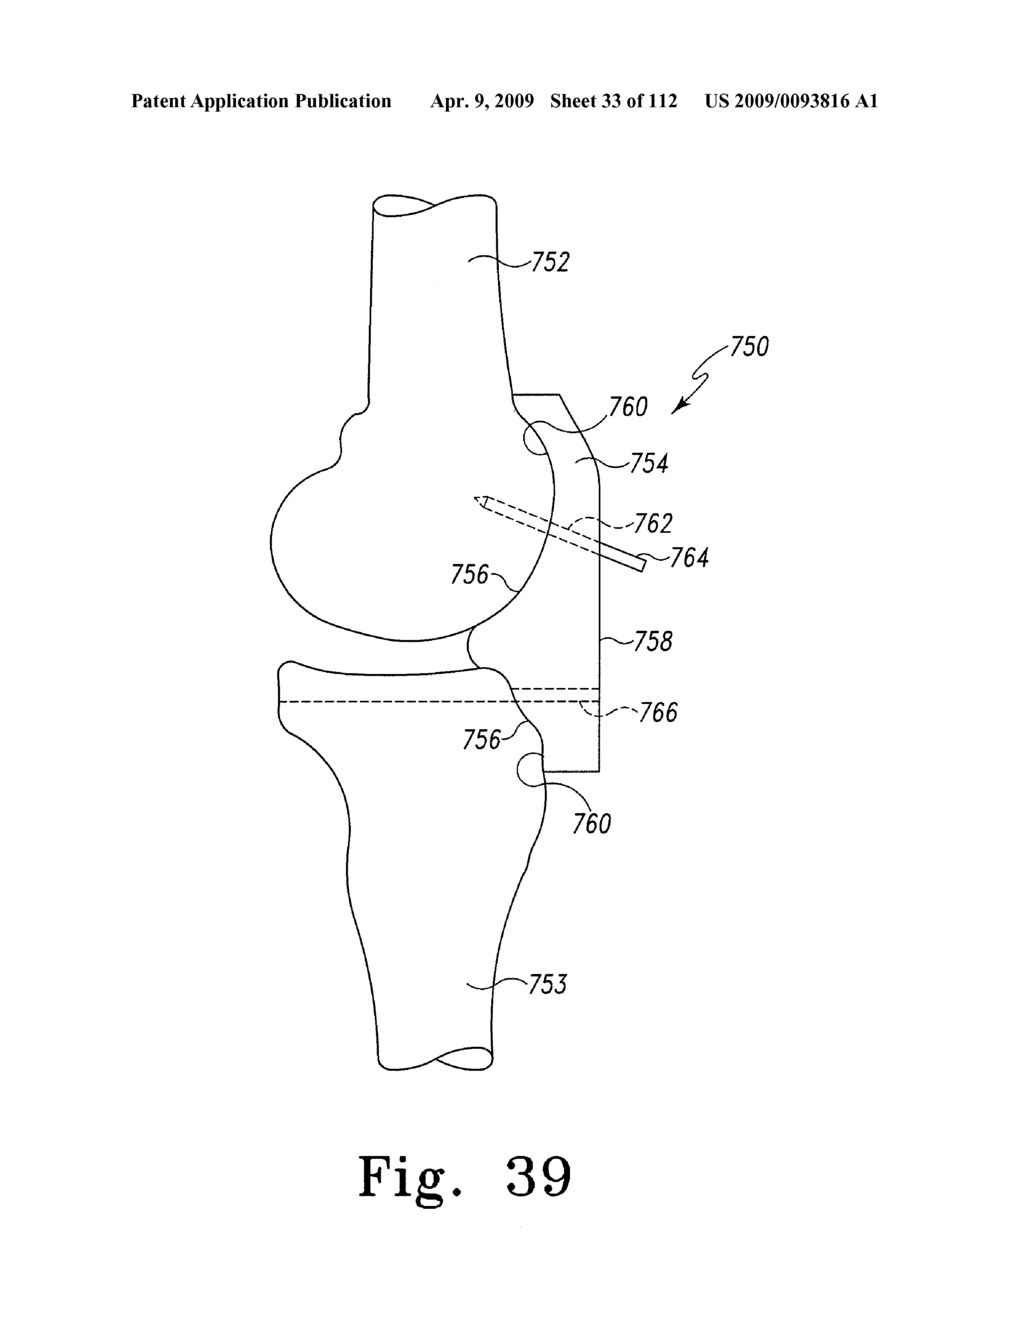 System and Method for Fabricating a Customized Patient-Specific Surgical Instrument - diagram, schematic, and image 34